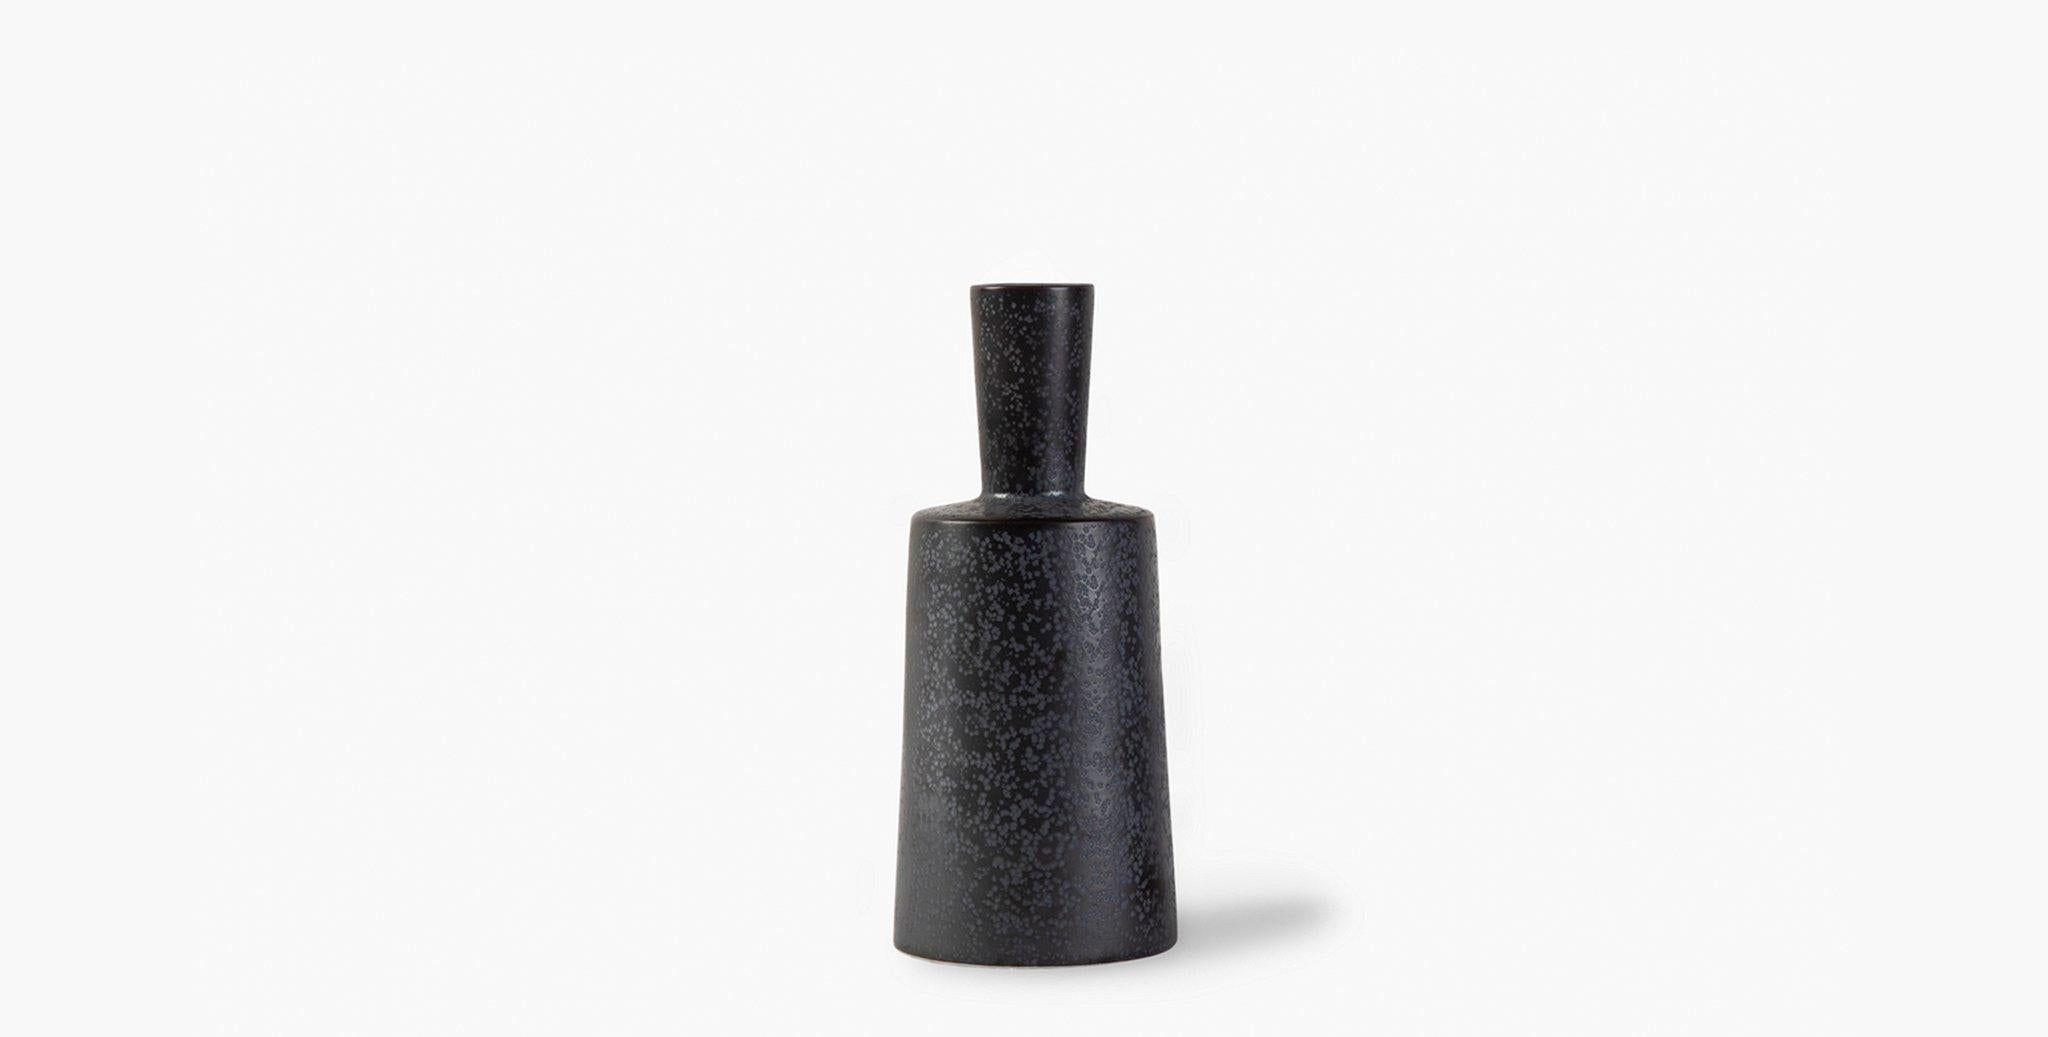 Our richly textured, metal glazed porcelain Nero vases have a modern sculptural silhouette. A narrow neck is paired with a wider base for visual contrast. Elegant on their own, or add a minimal arrangement of branches for a striking